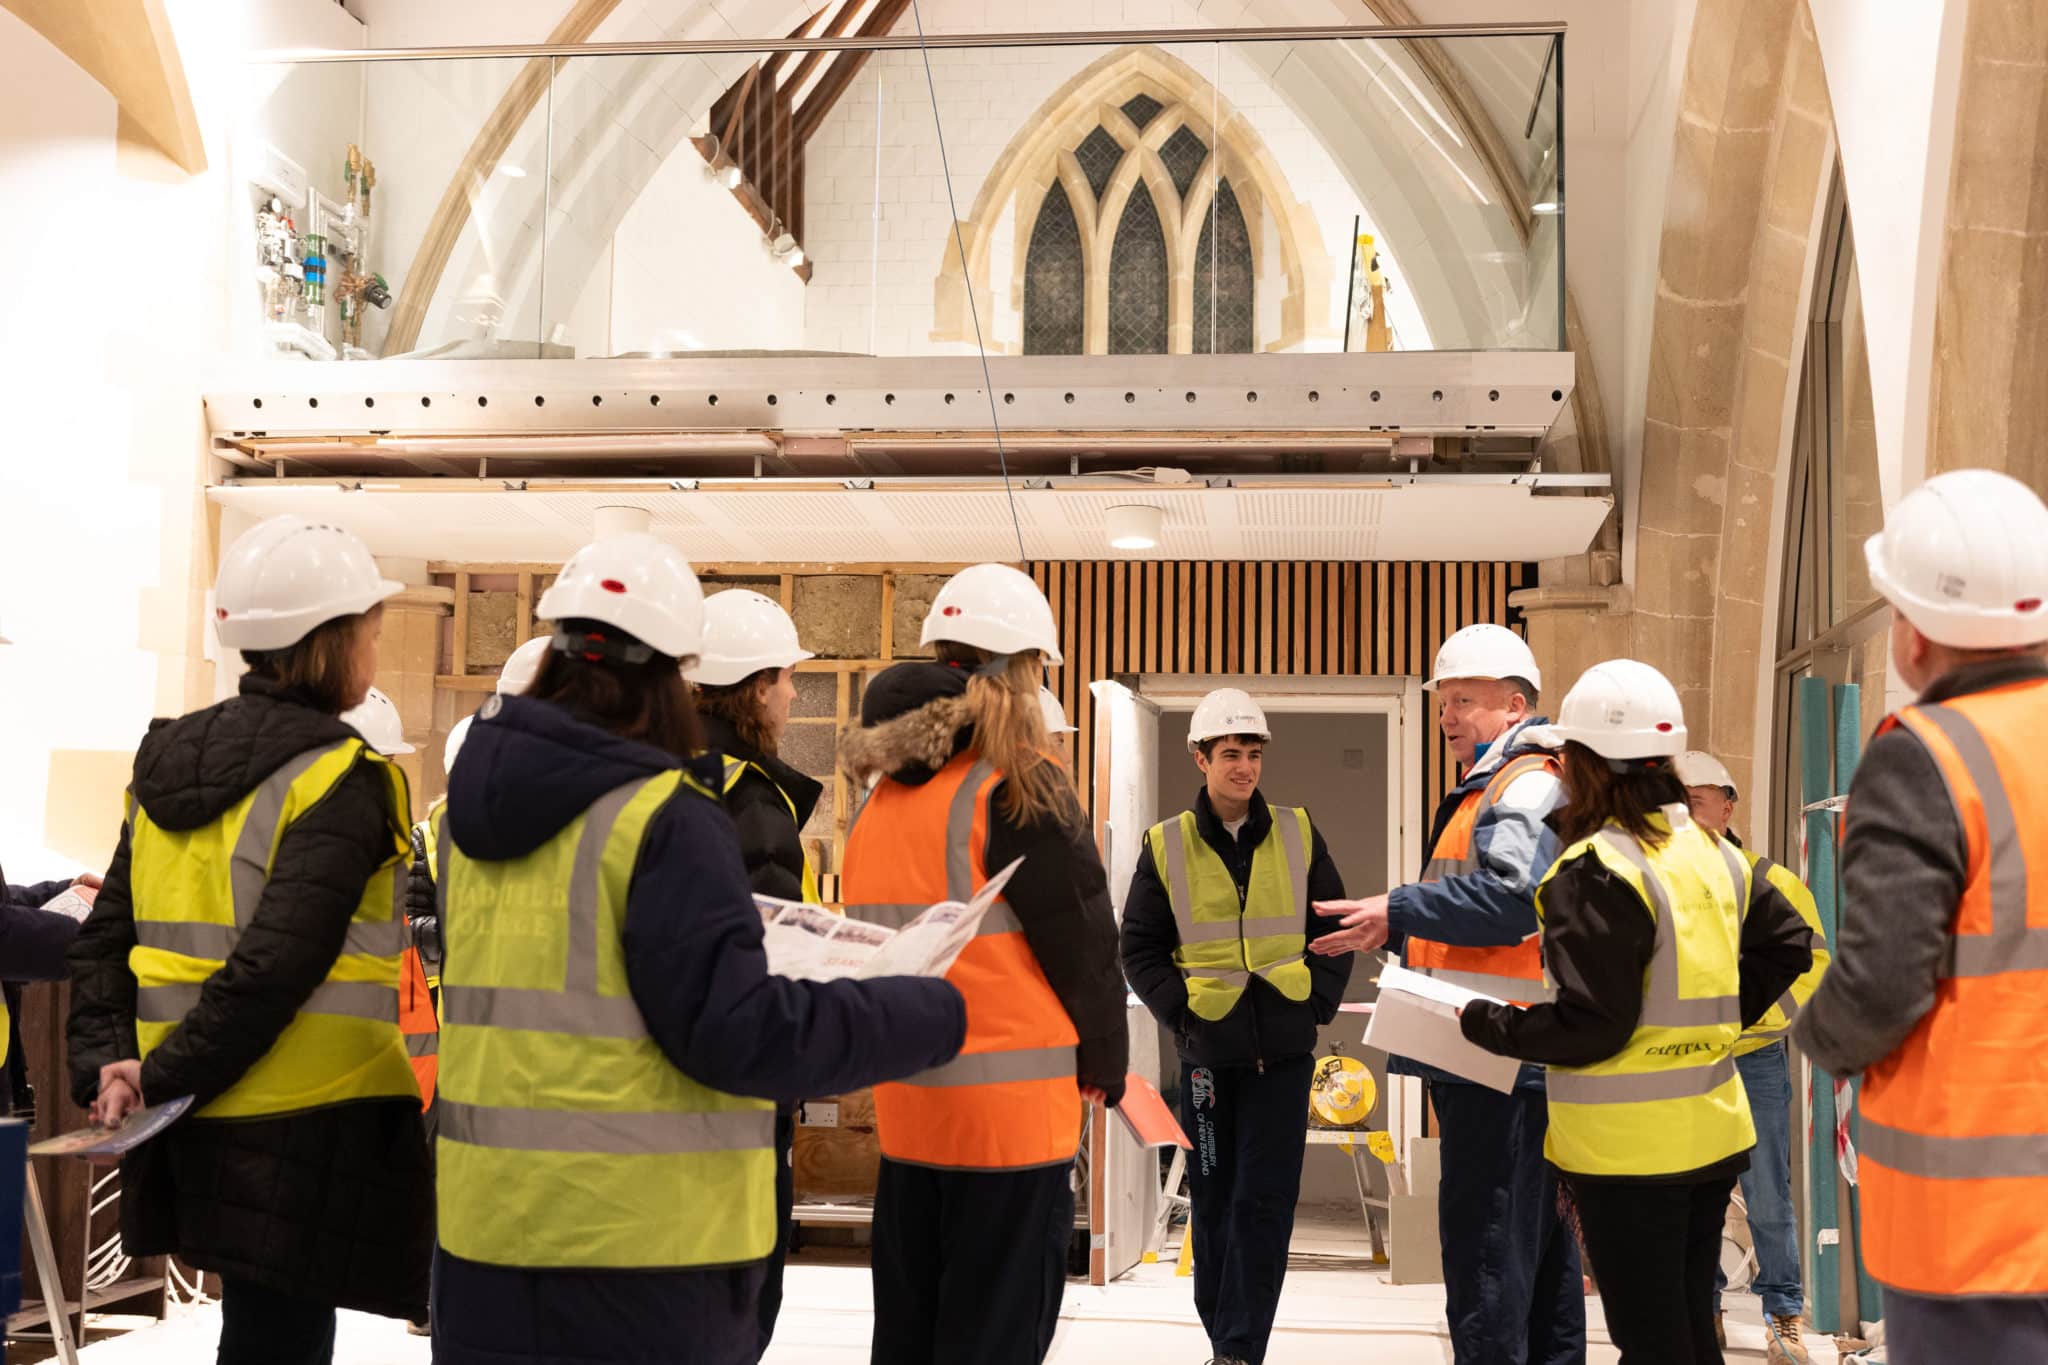 Al MacEwen delivering a brief in the cafe area, with the North Aisle Mezzanine study area in the rear